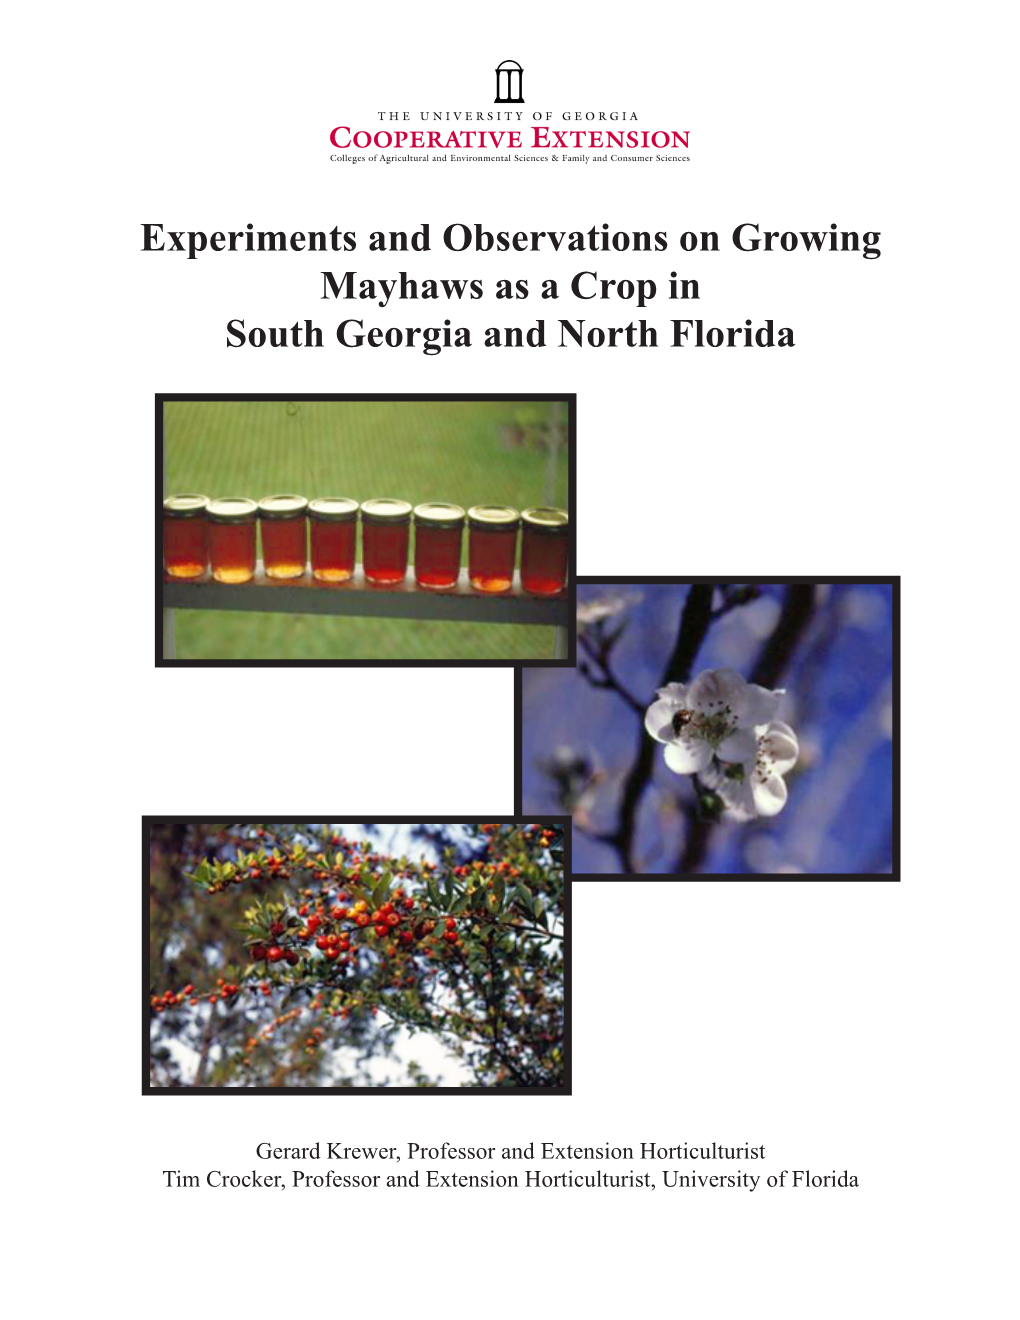 Experiments and Observations on Growing Mayhaws As a Crop in South Georgia and North Florida